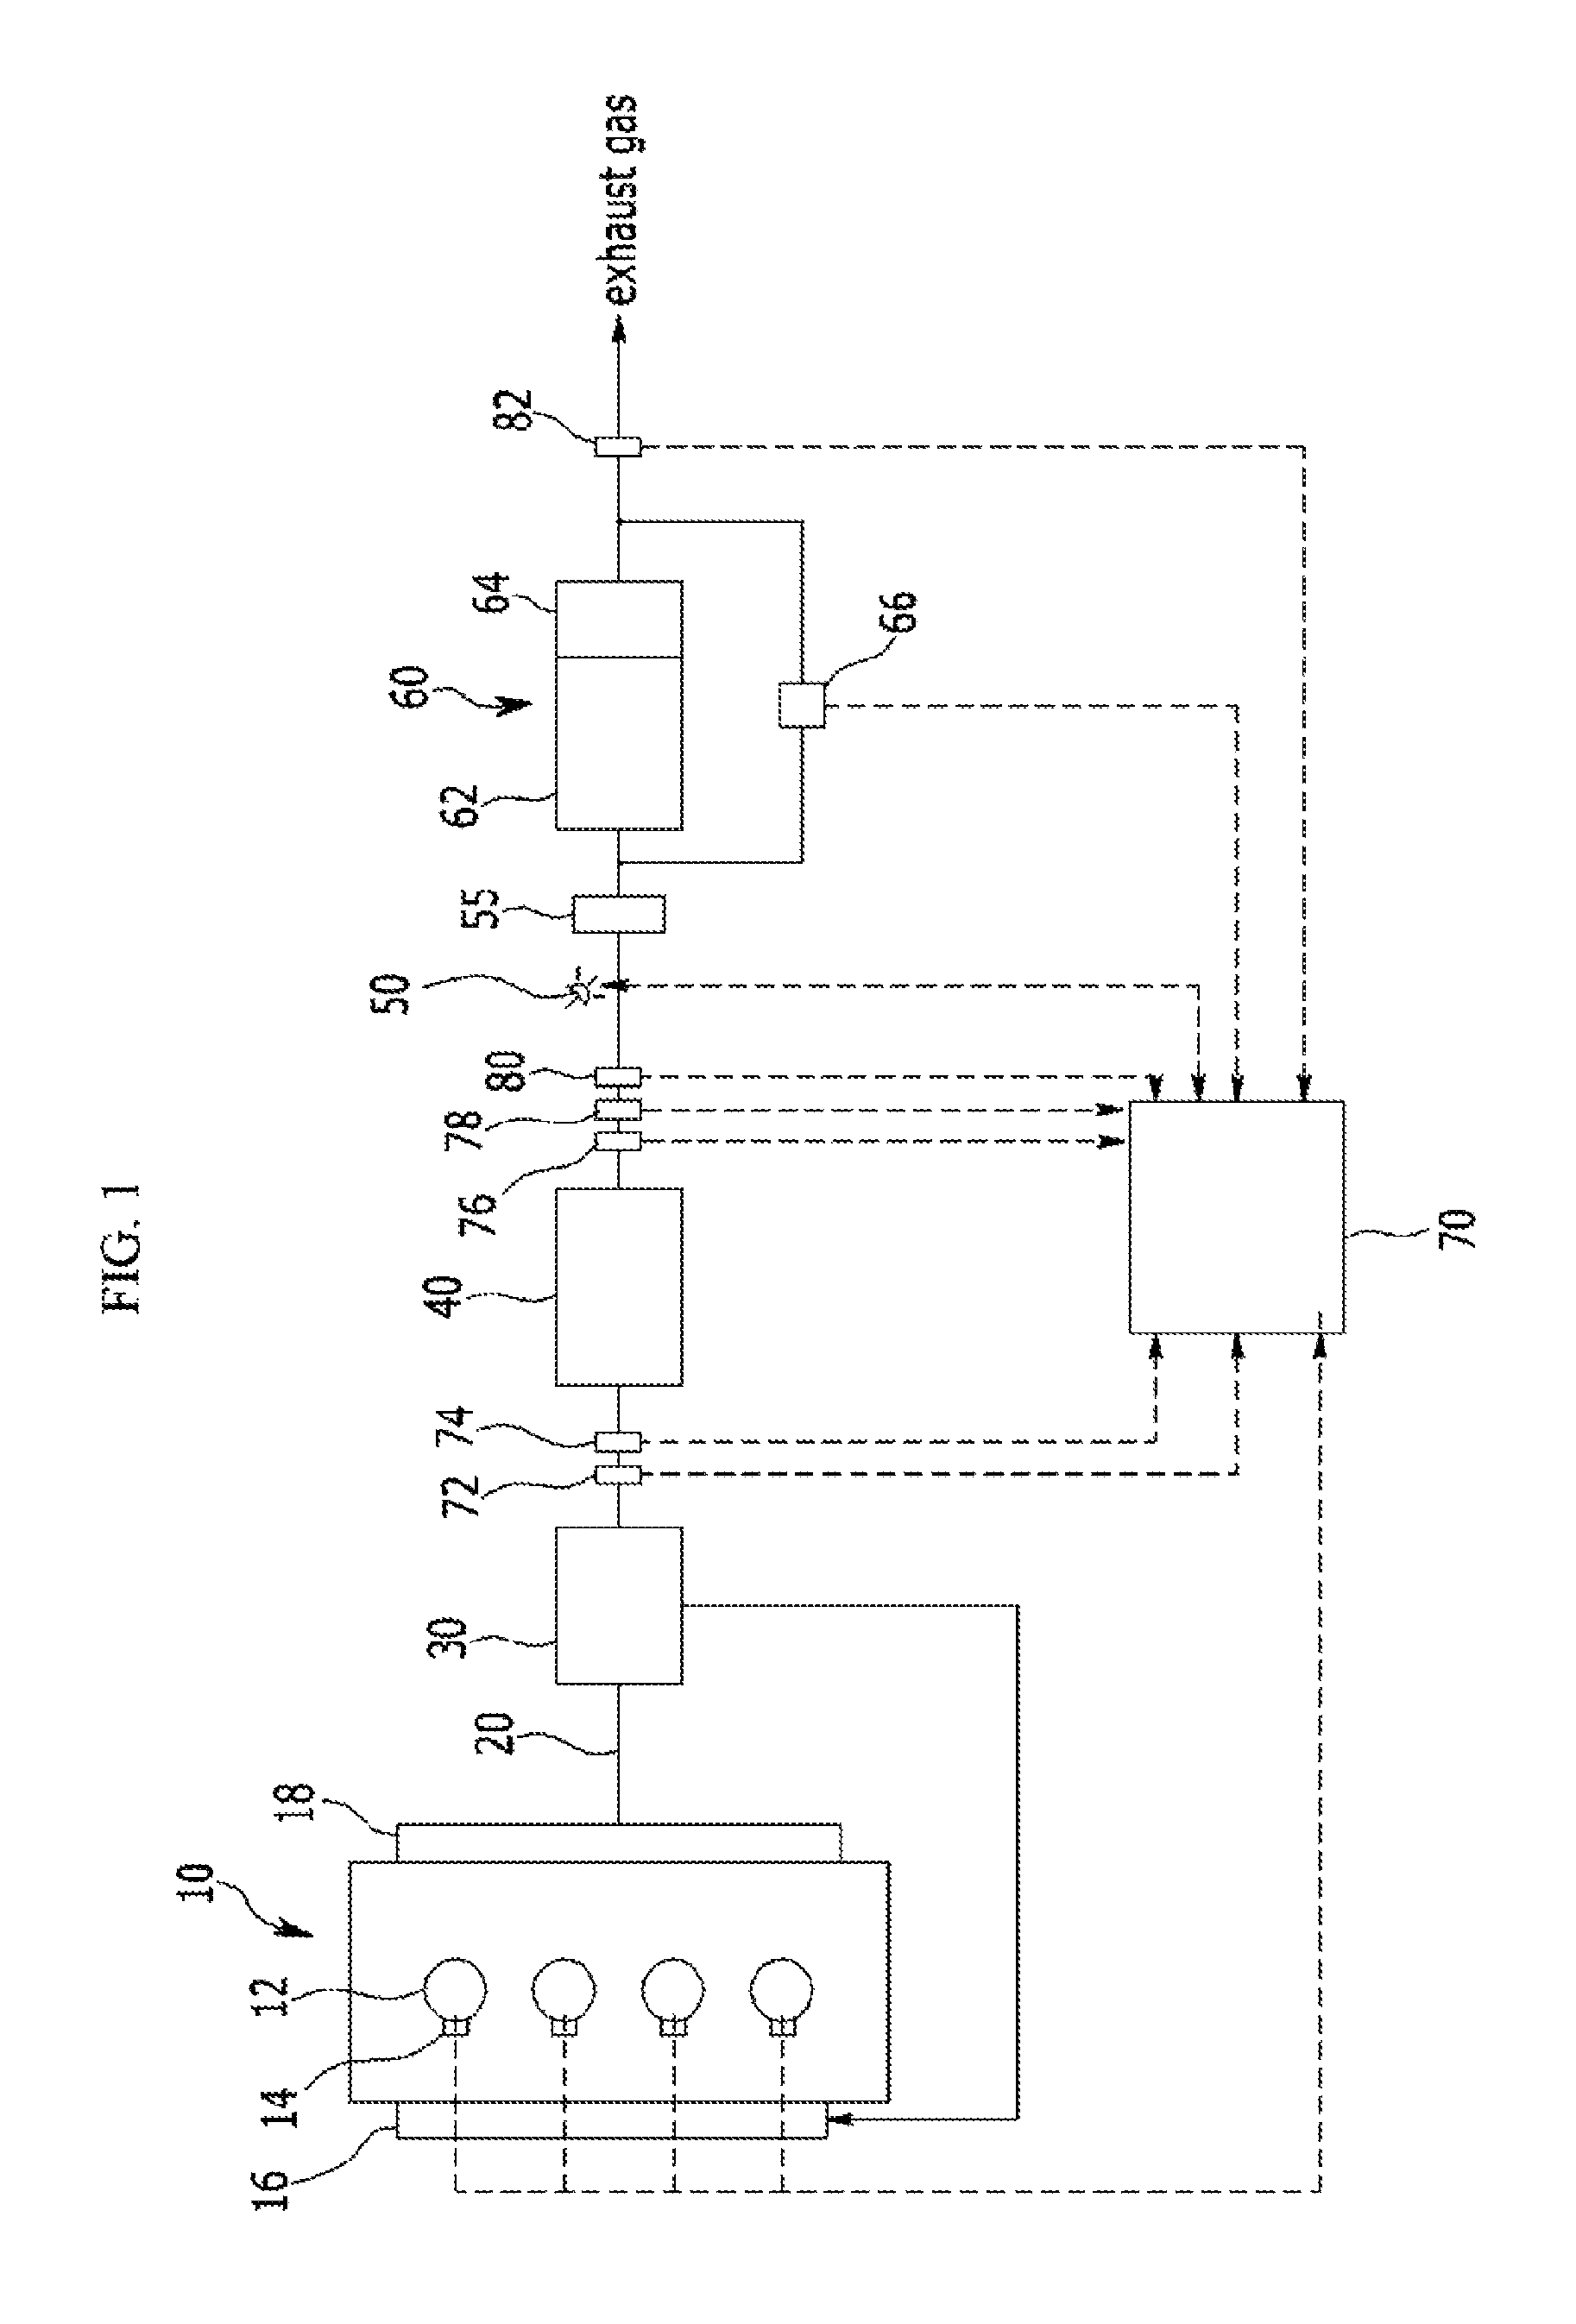 System and method of defulfurizing lean NOx trap